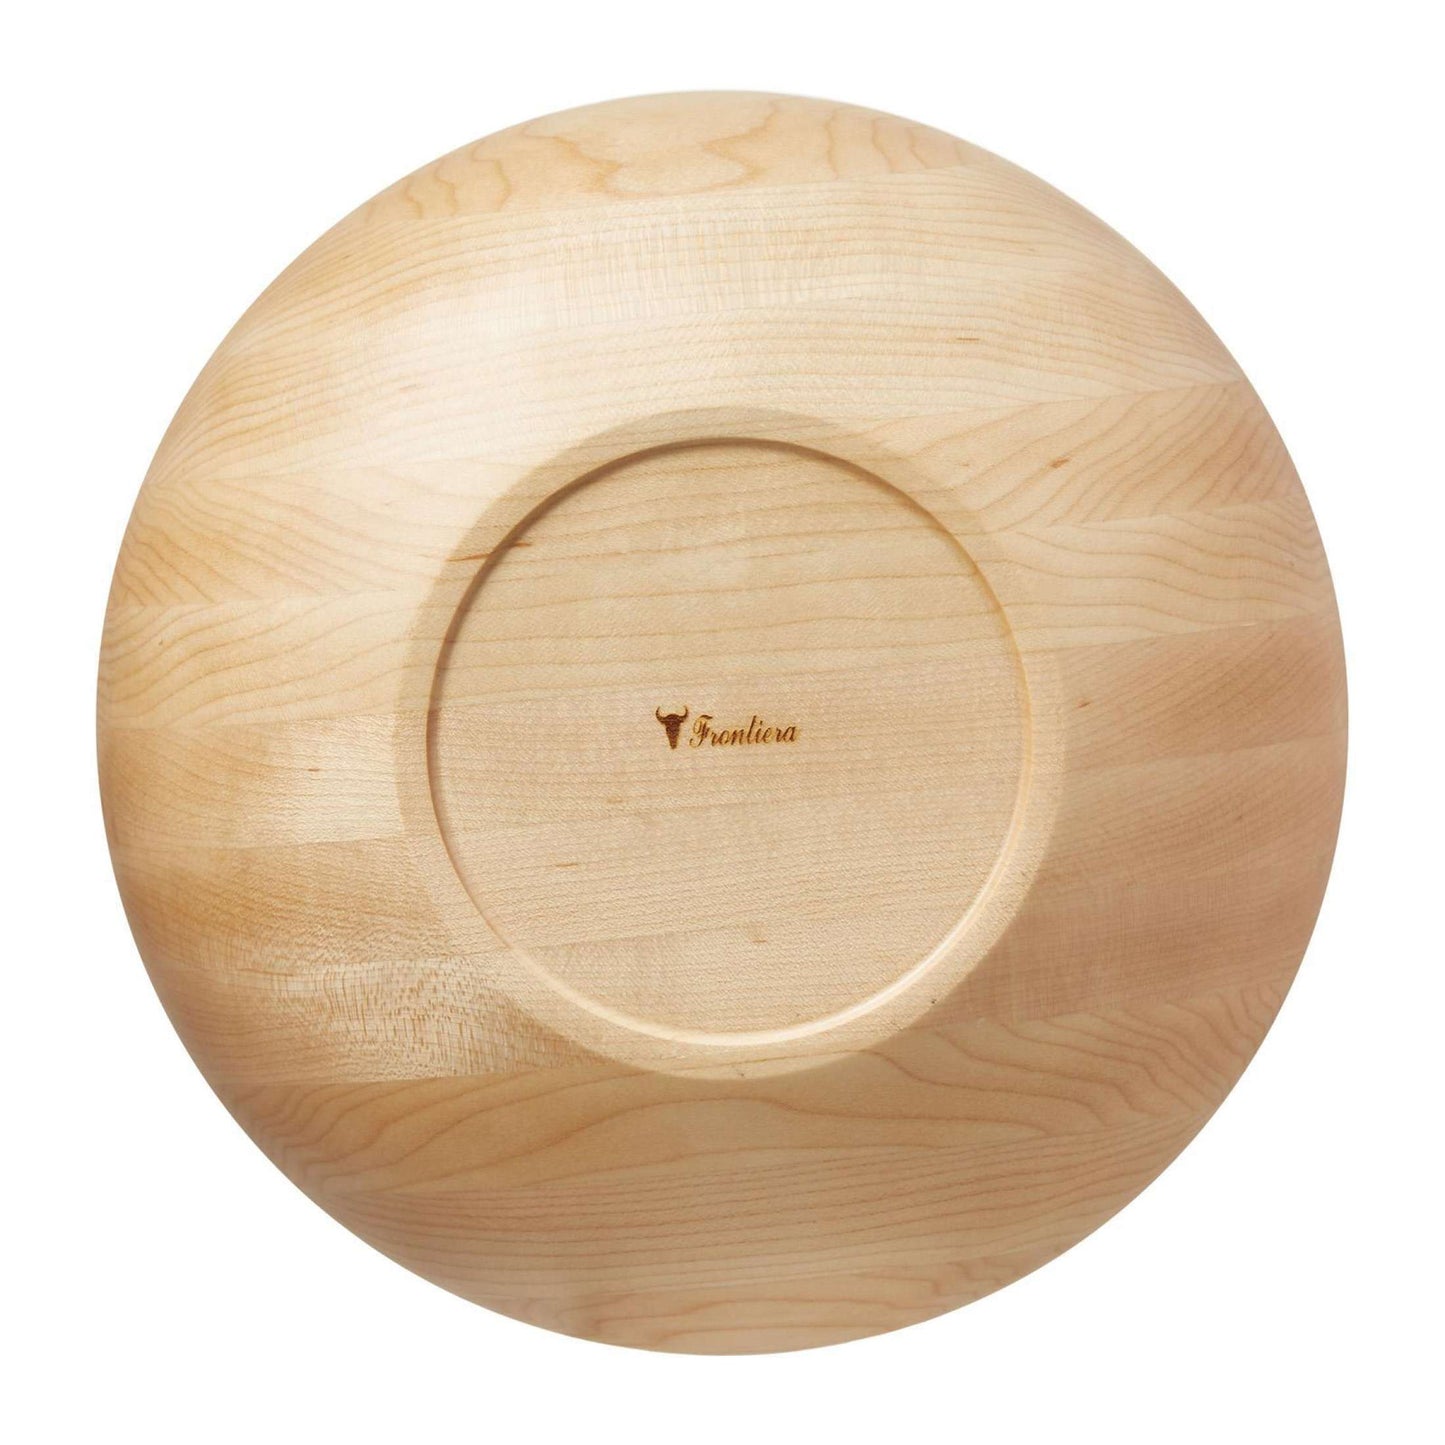 Frontiera Maplewood Salad Bowl 230mm [SOLD OUT]